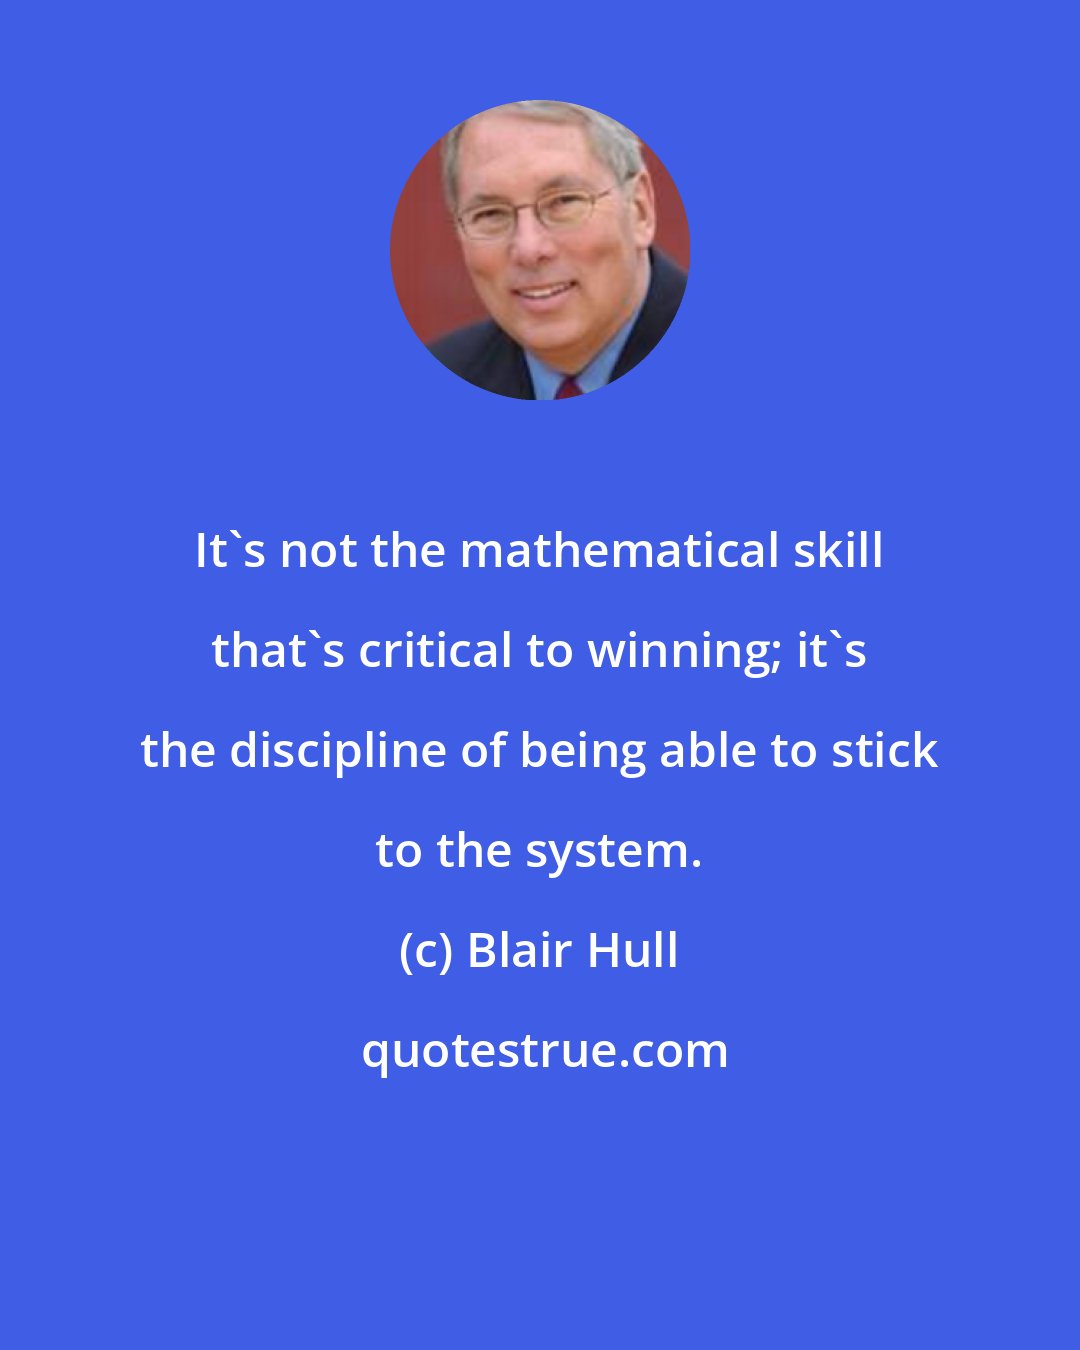 Blair Hull: It's not the mathematical skill that's critical to winning; it's the discipline of being able to stick to the system.